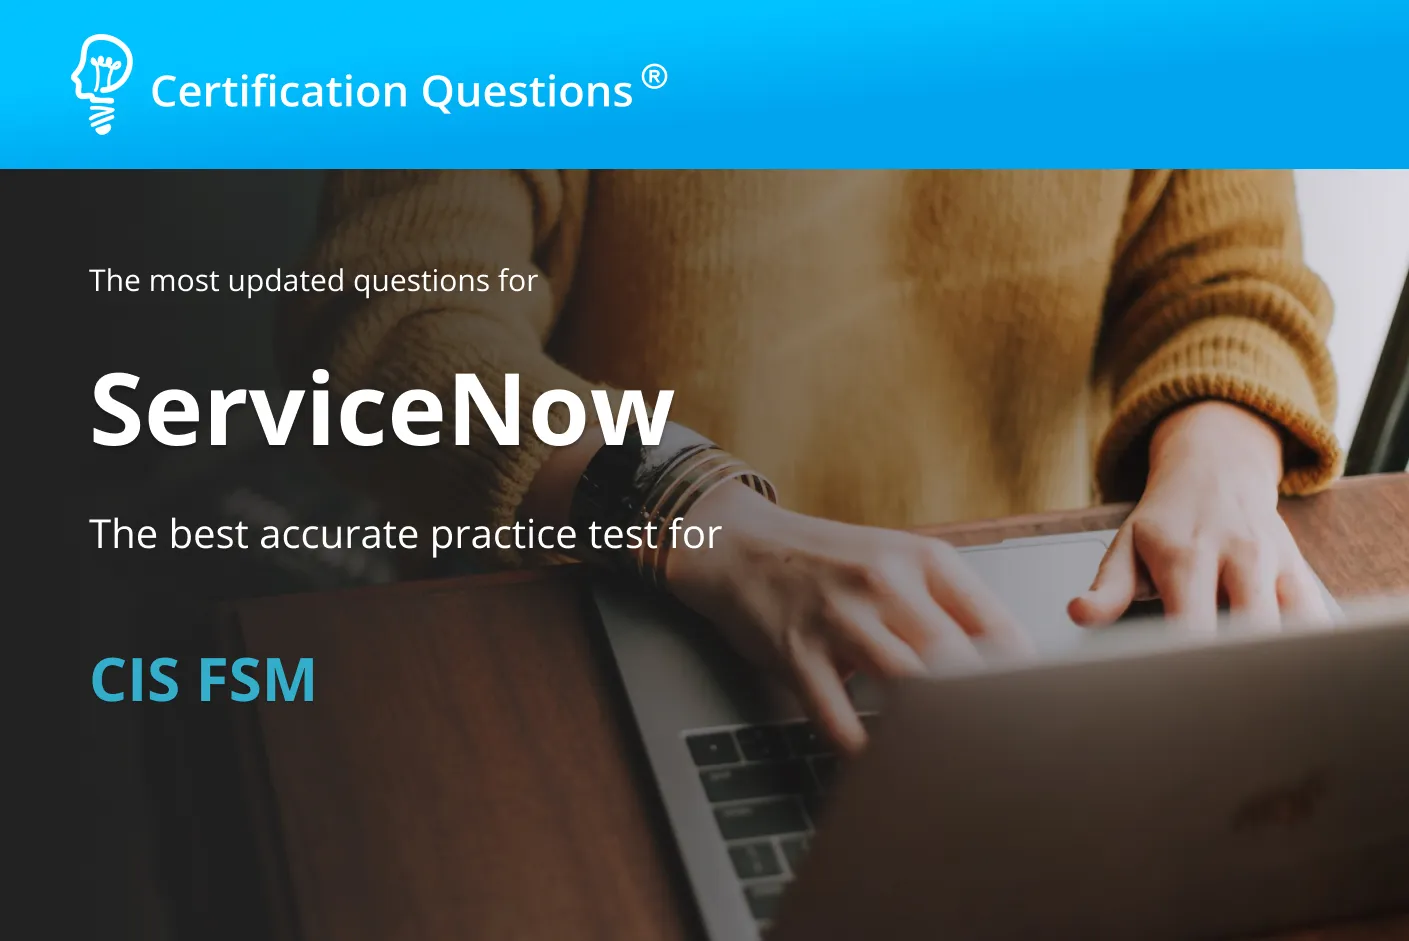 This image is related to the Field Service Management ServiceNow test in the United States of America.